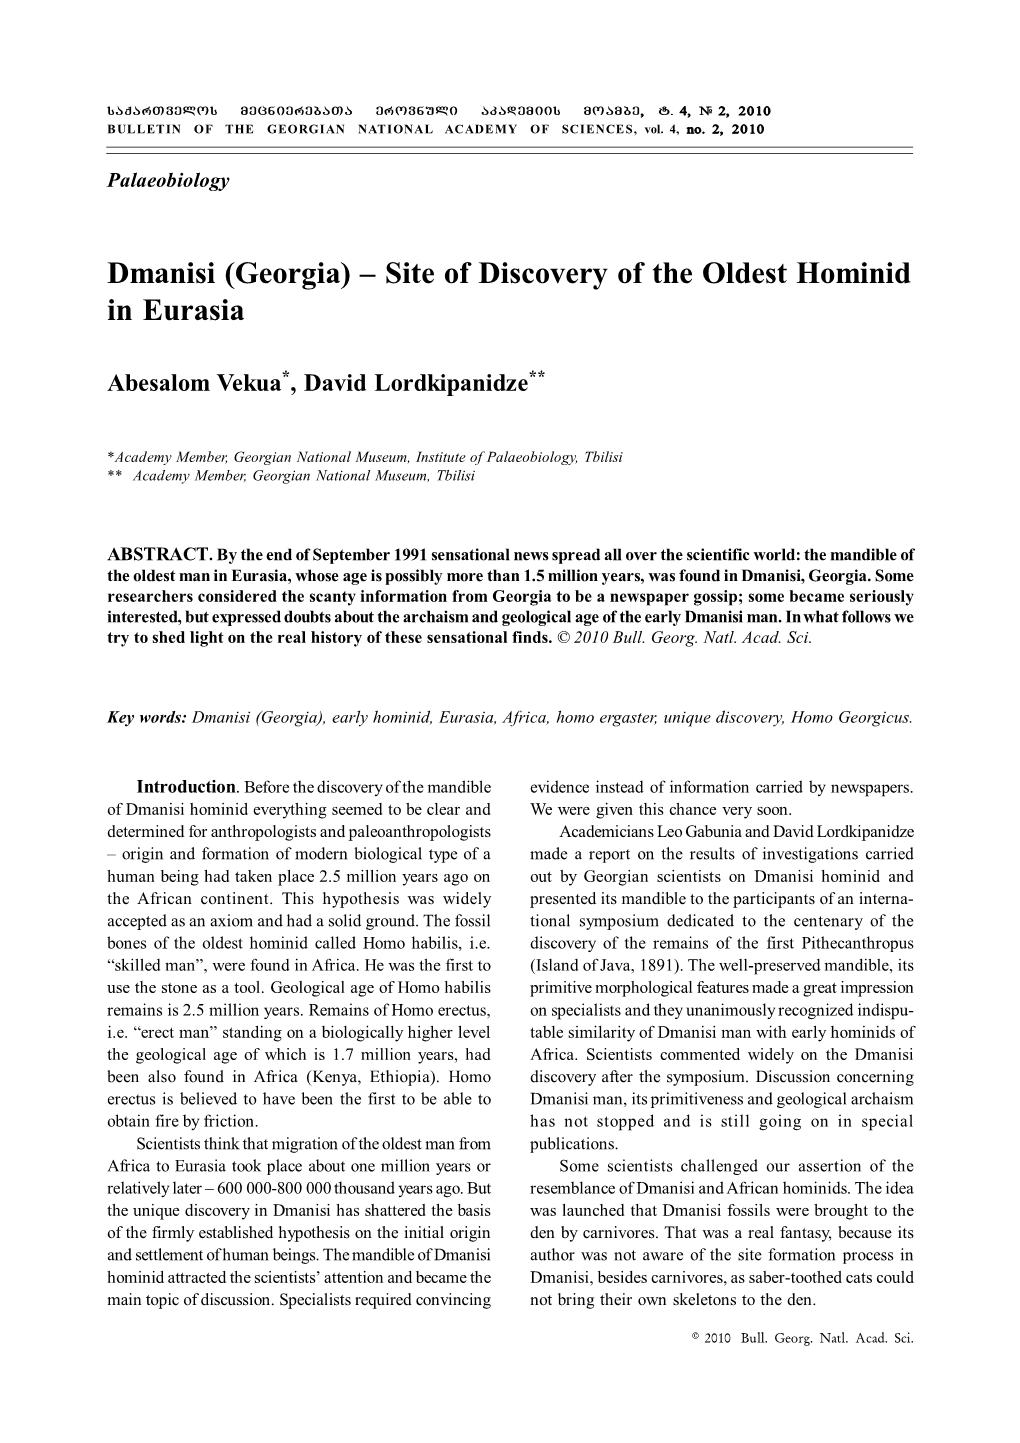 Dmanisi (Georgia) – Site of Discovery of the Oldest Hominid in Eurasia